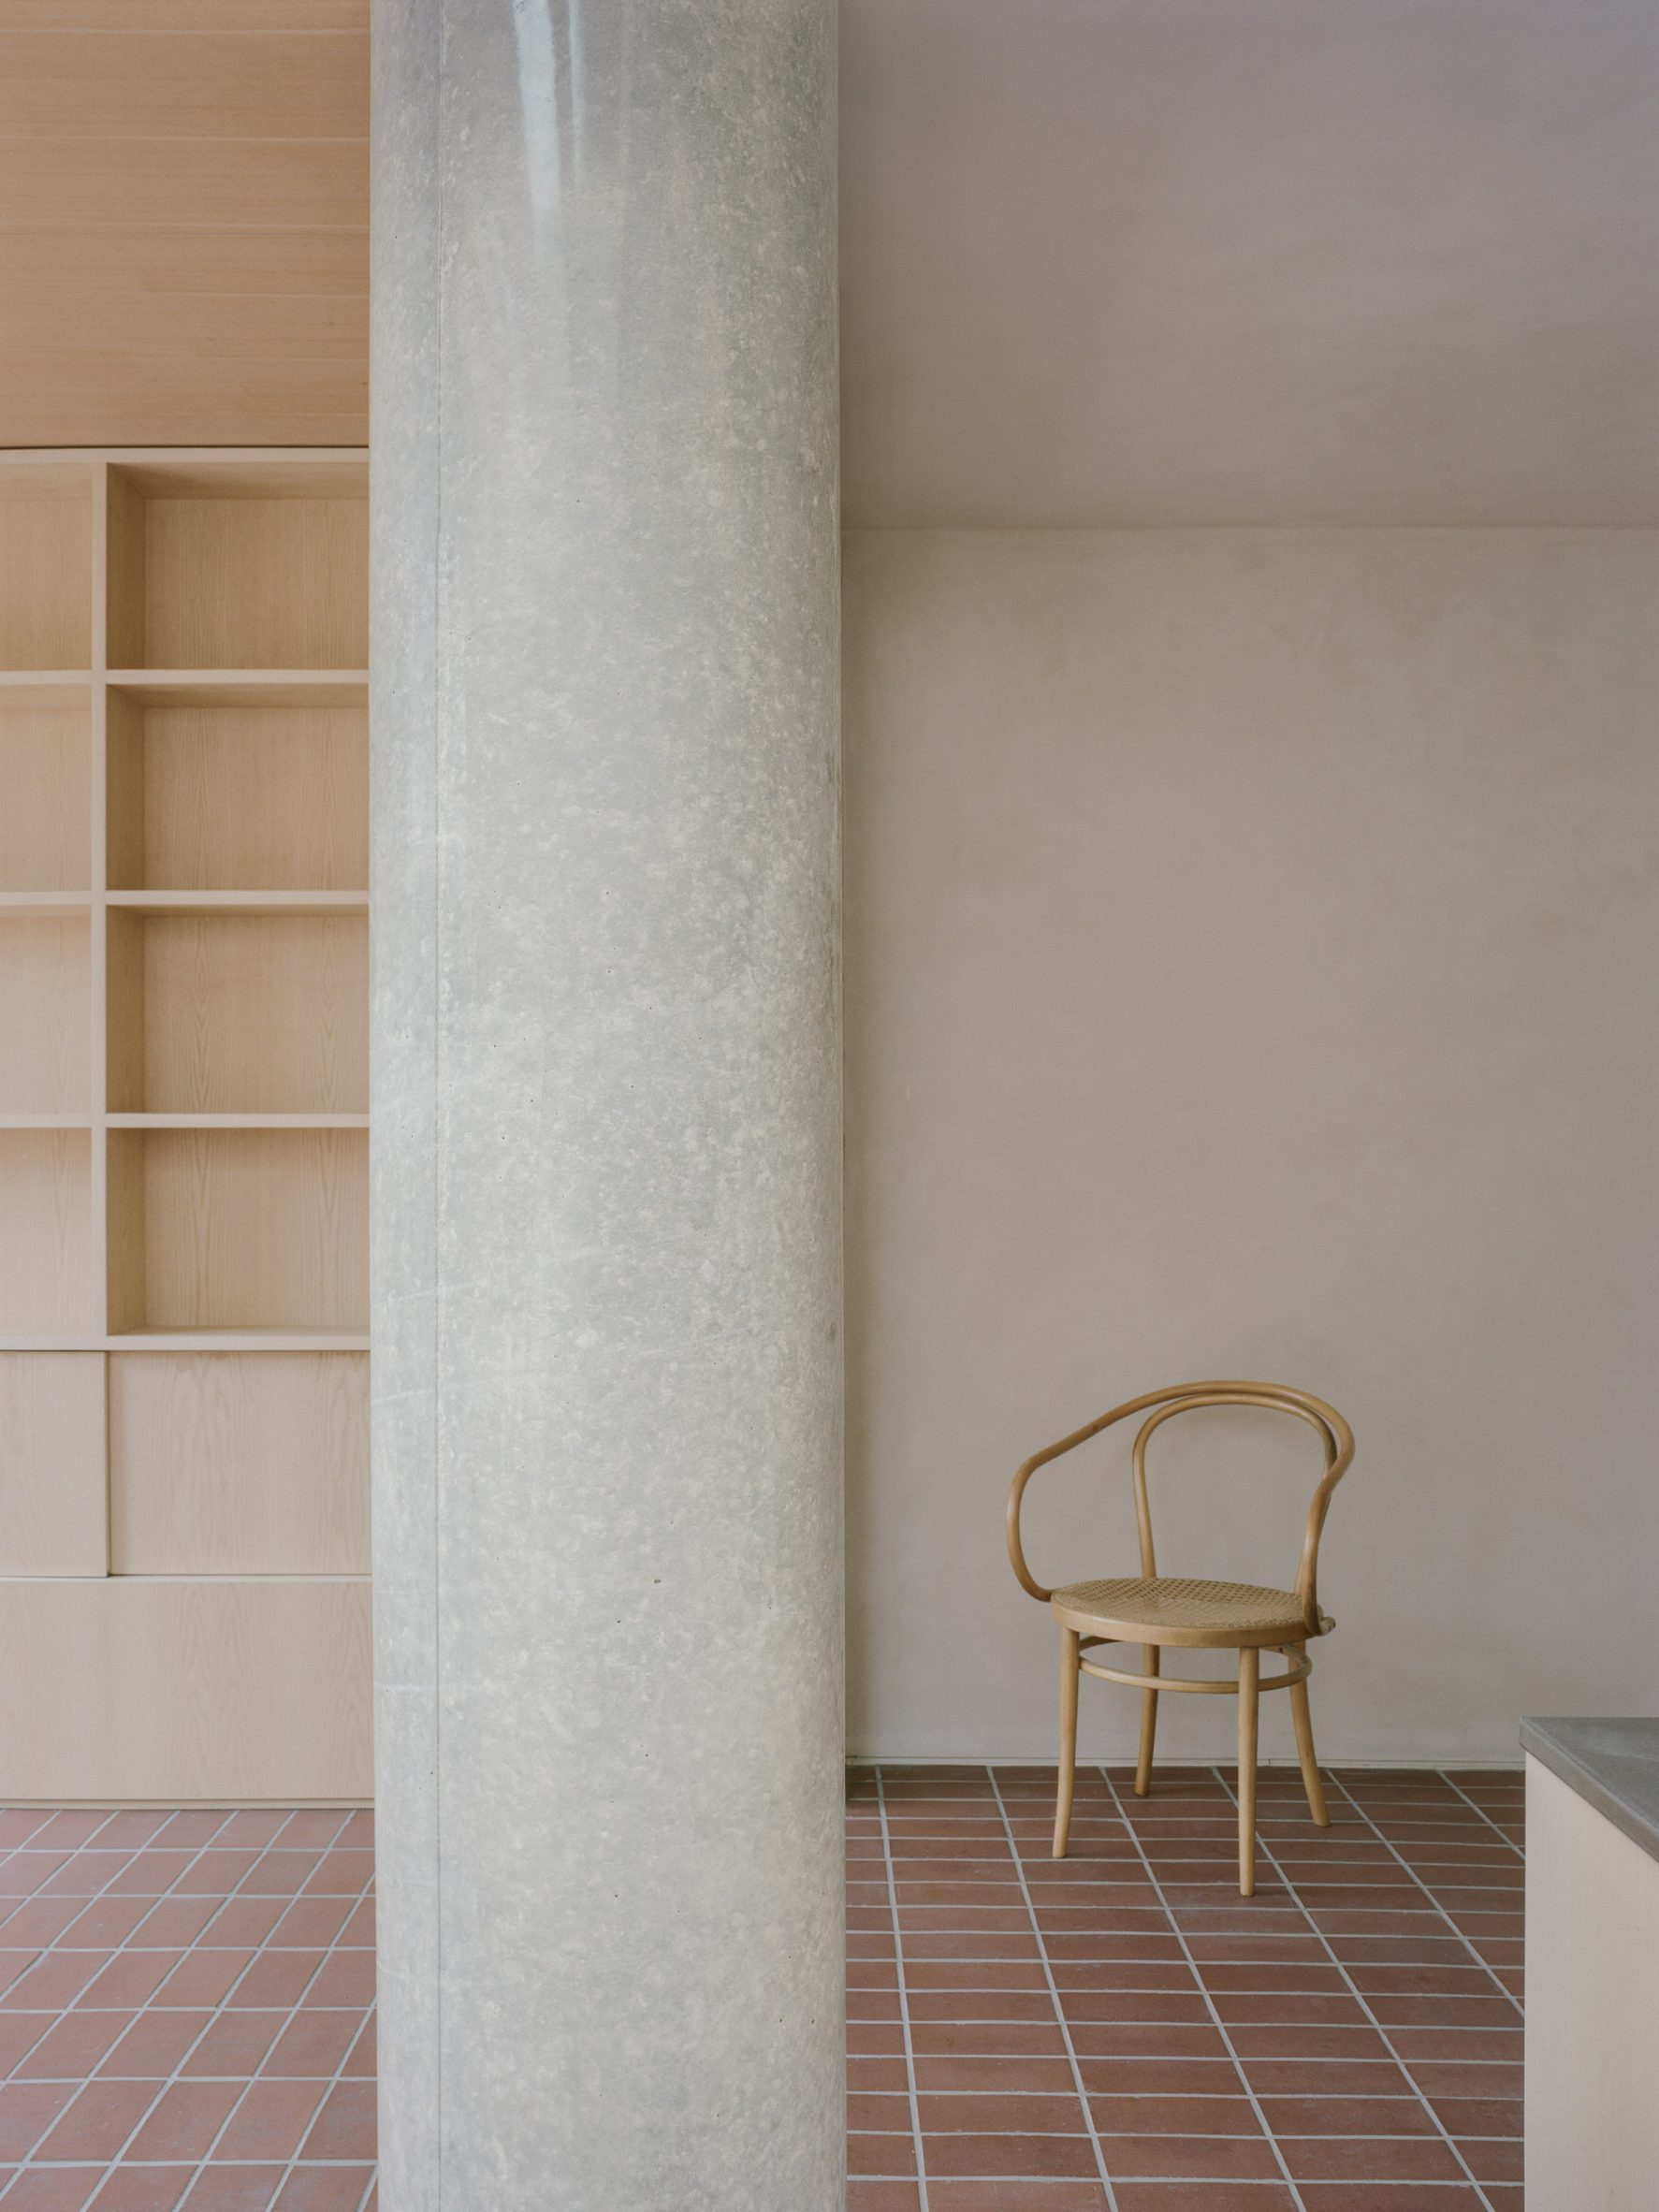 Concrete column and chair in Herne Hill House extension by TYPE